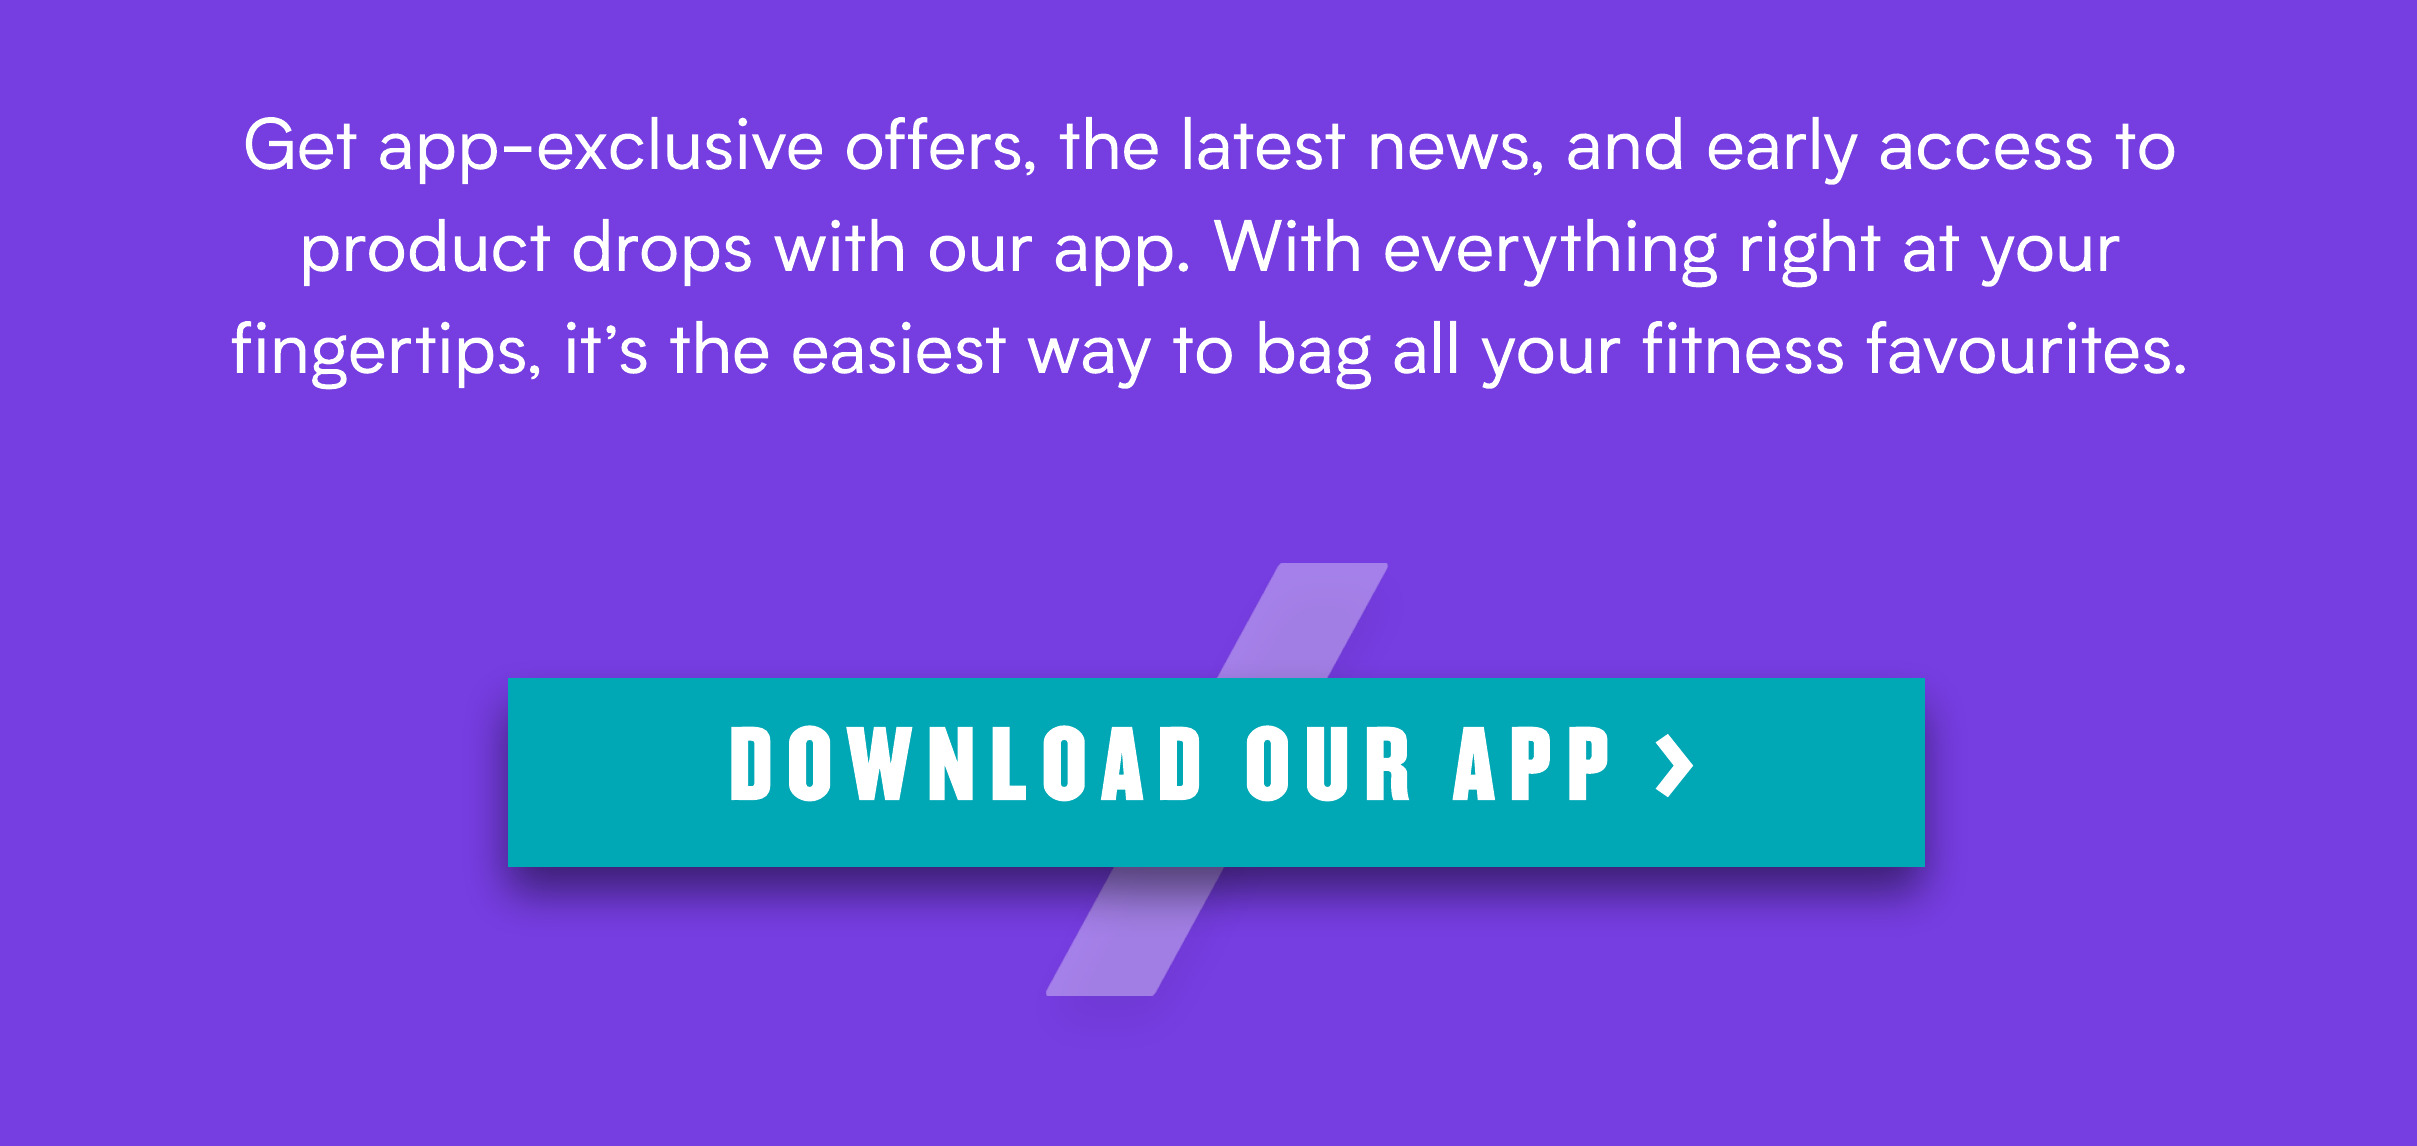 Get app-exclusive offers, the latest news, and early access to product drops with our app. With everything right at your fingertips, its the easiest way to bag all your fitness favourites. 